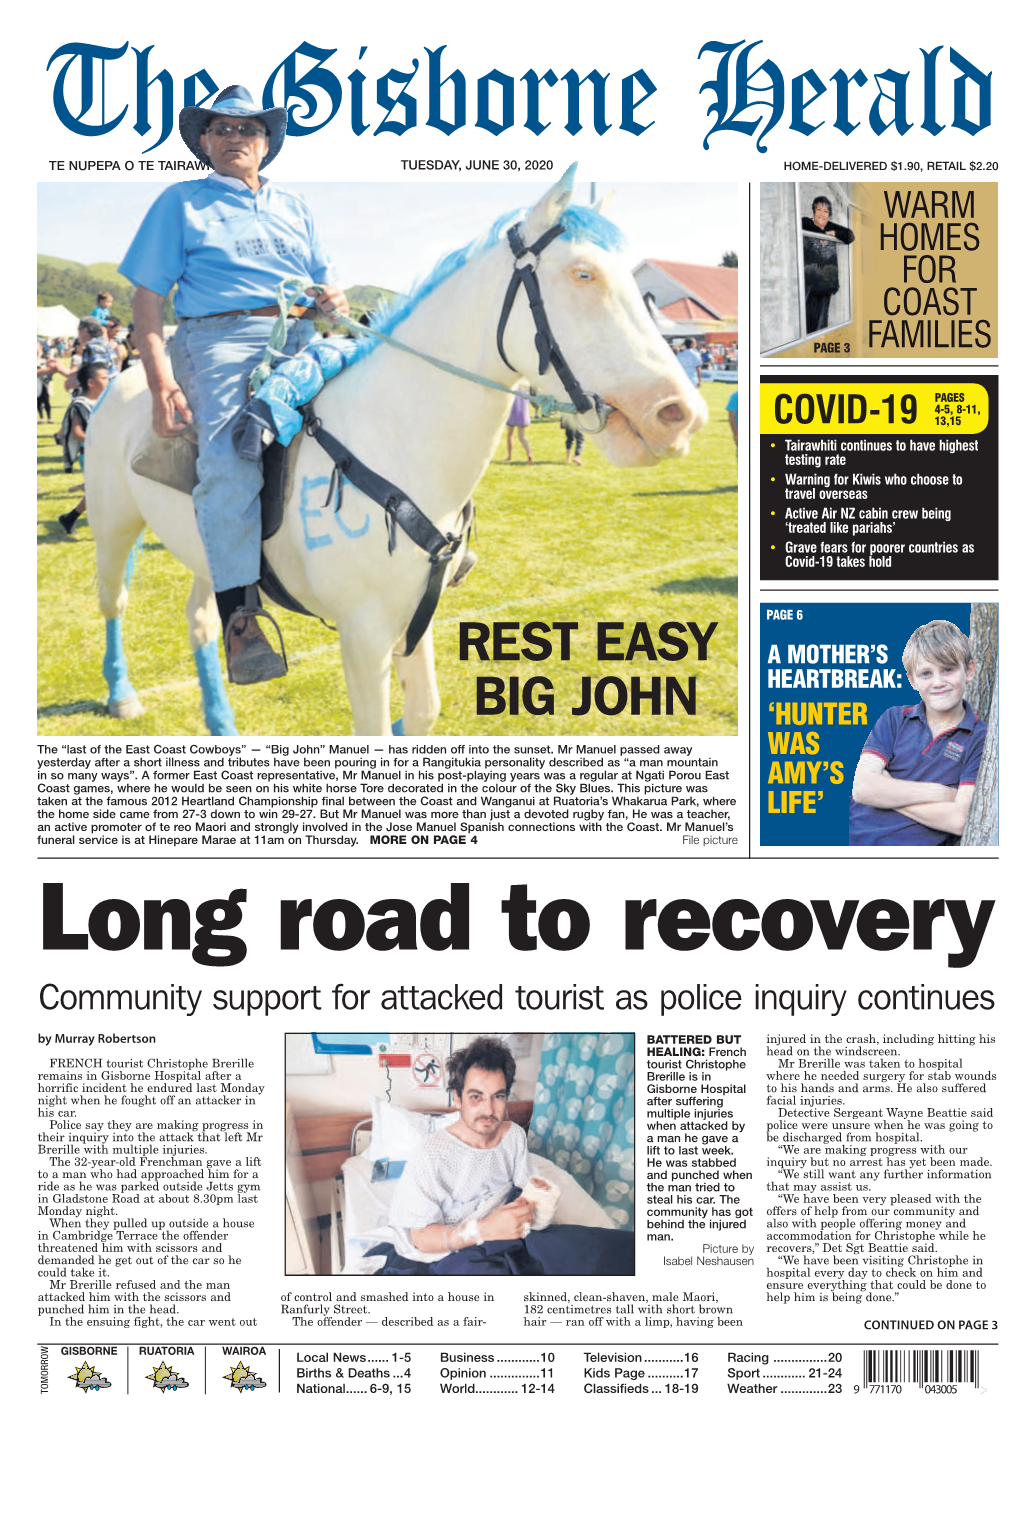 Tuesday, June 30, 2020 Home-Delivered $1.90, Retail $2.20 Warm Homes for Coast Families Page 3